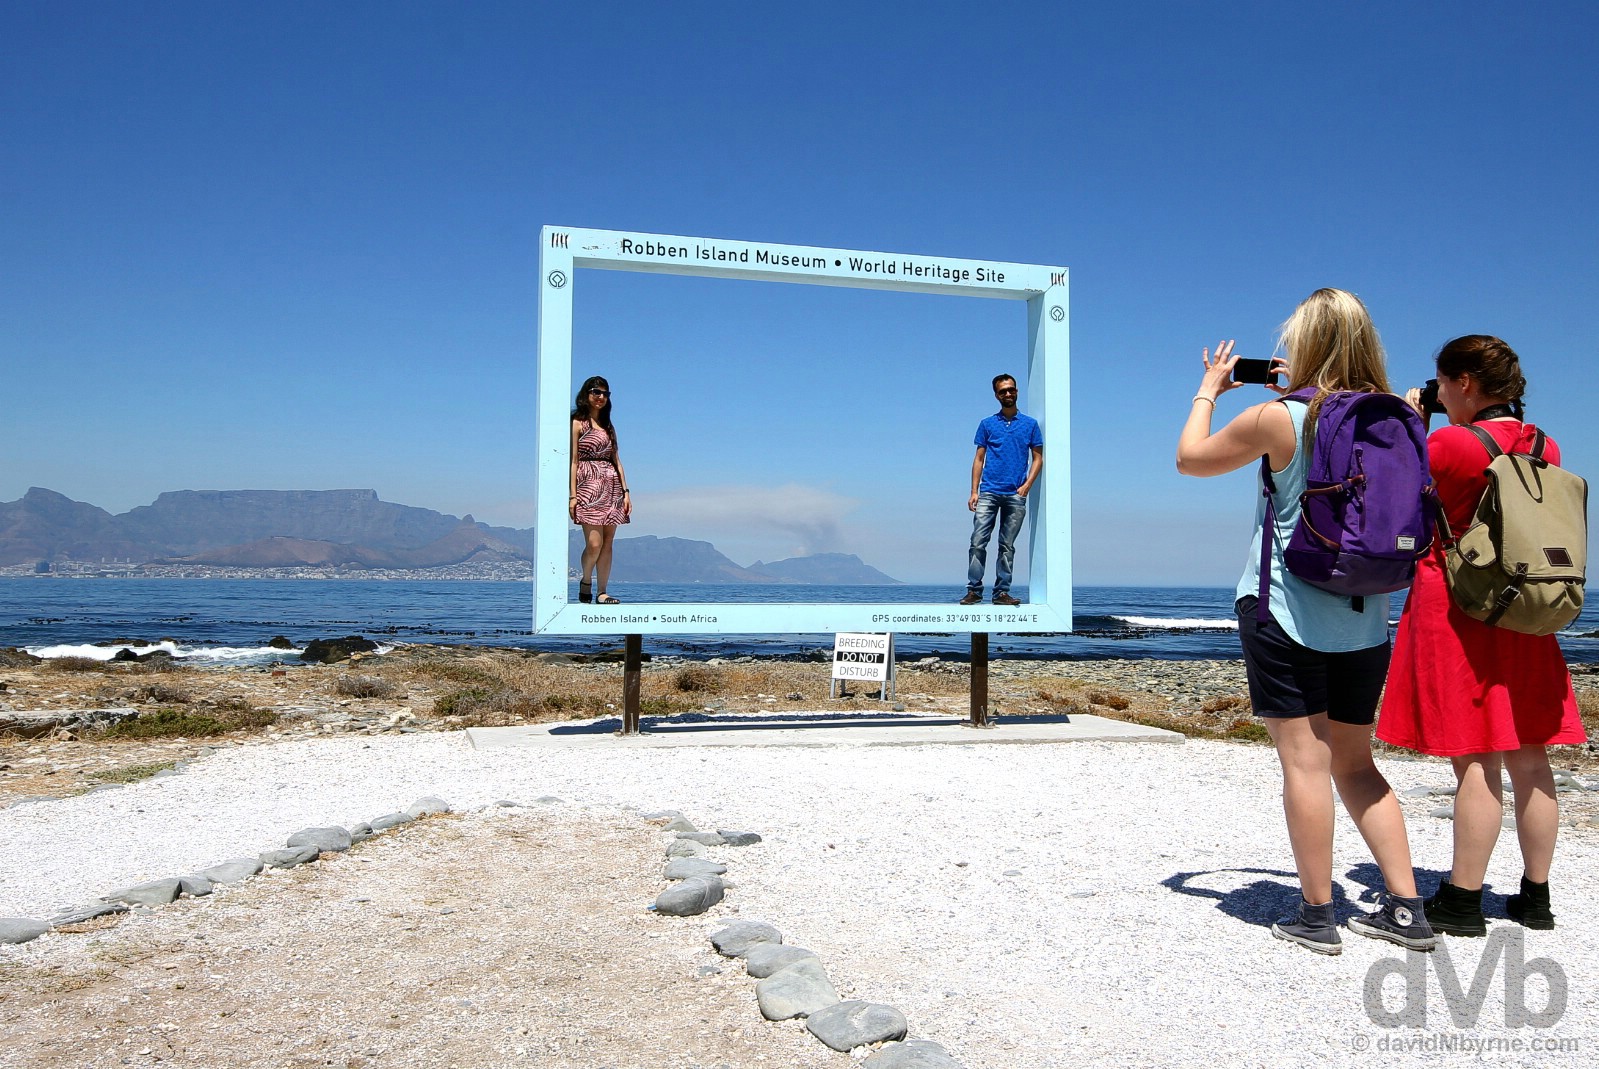 Framed. Robben Island, Table Bay, Western Cape, South Africa. February 22, 2017.